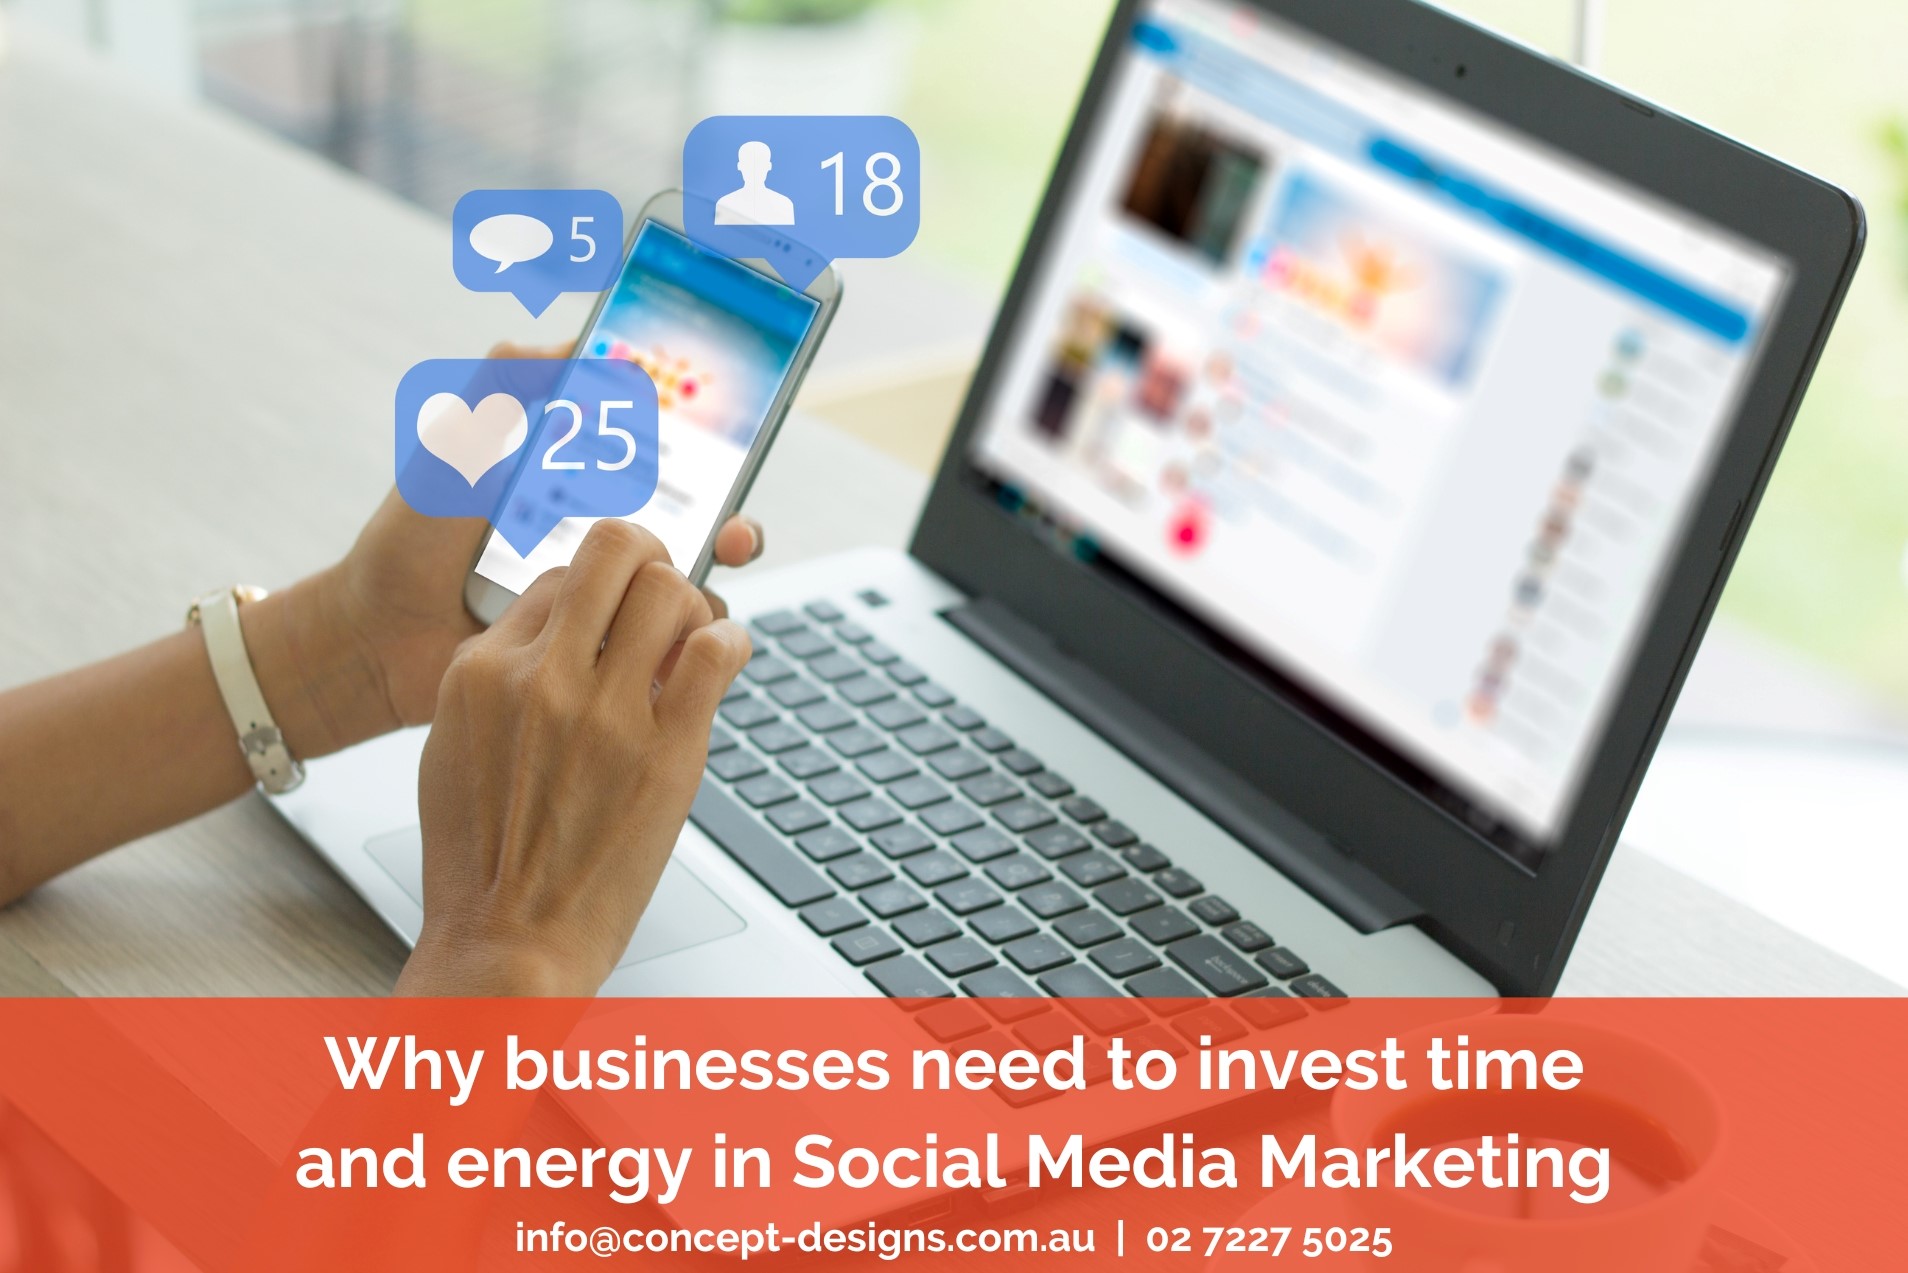 Why businesses need to invest time and energy in Social Media Marketing